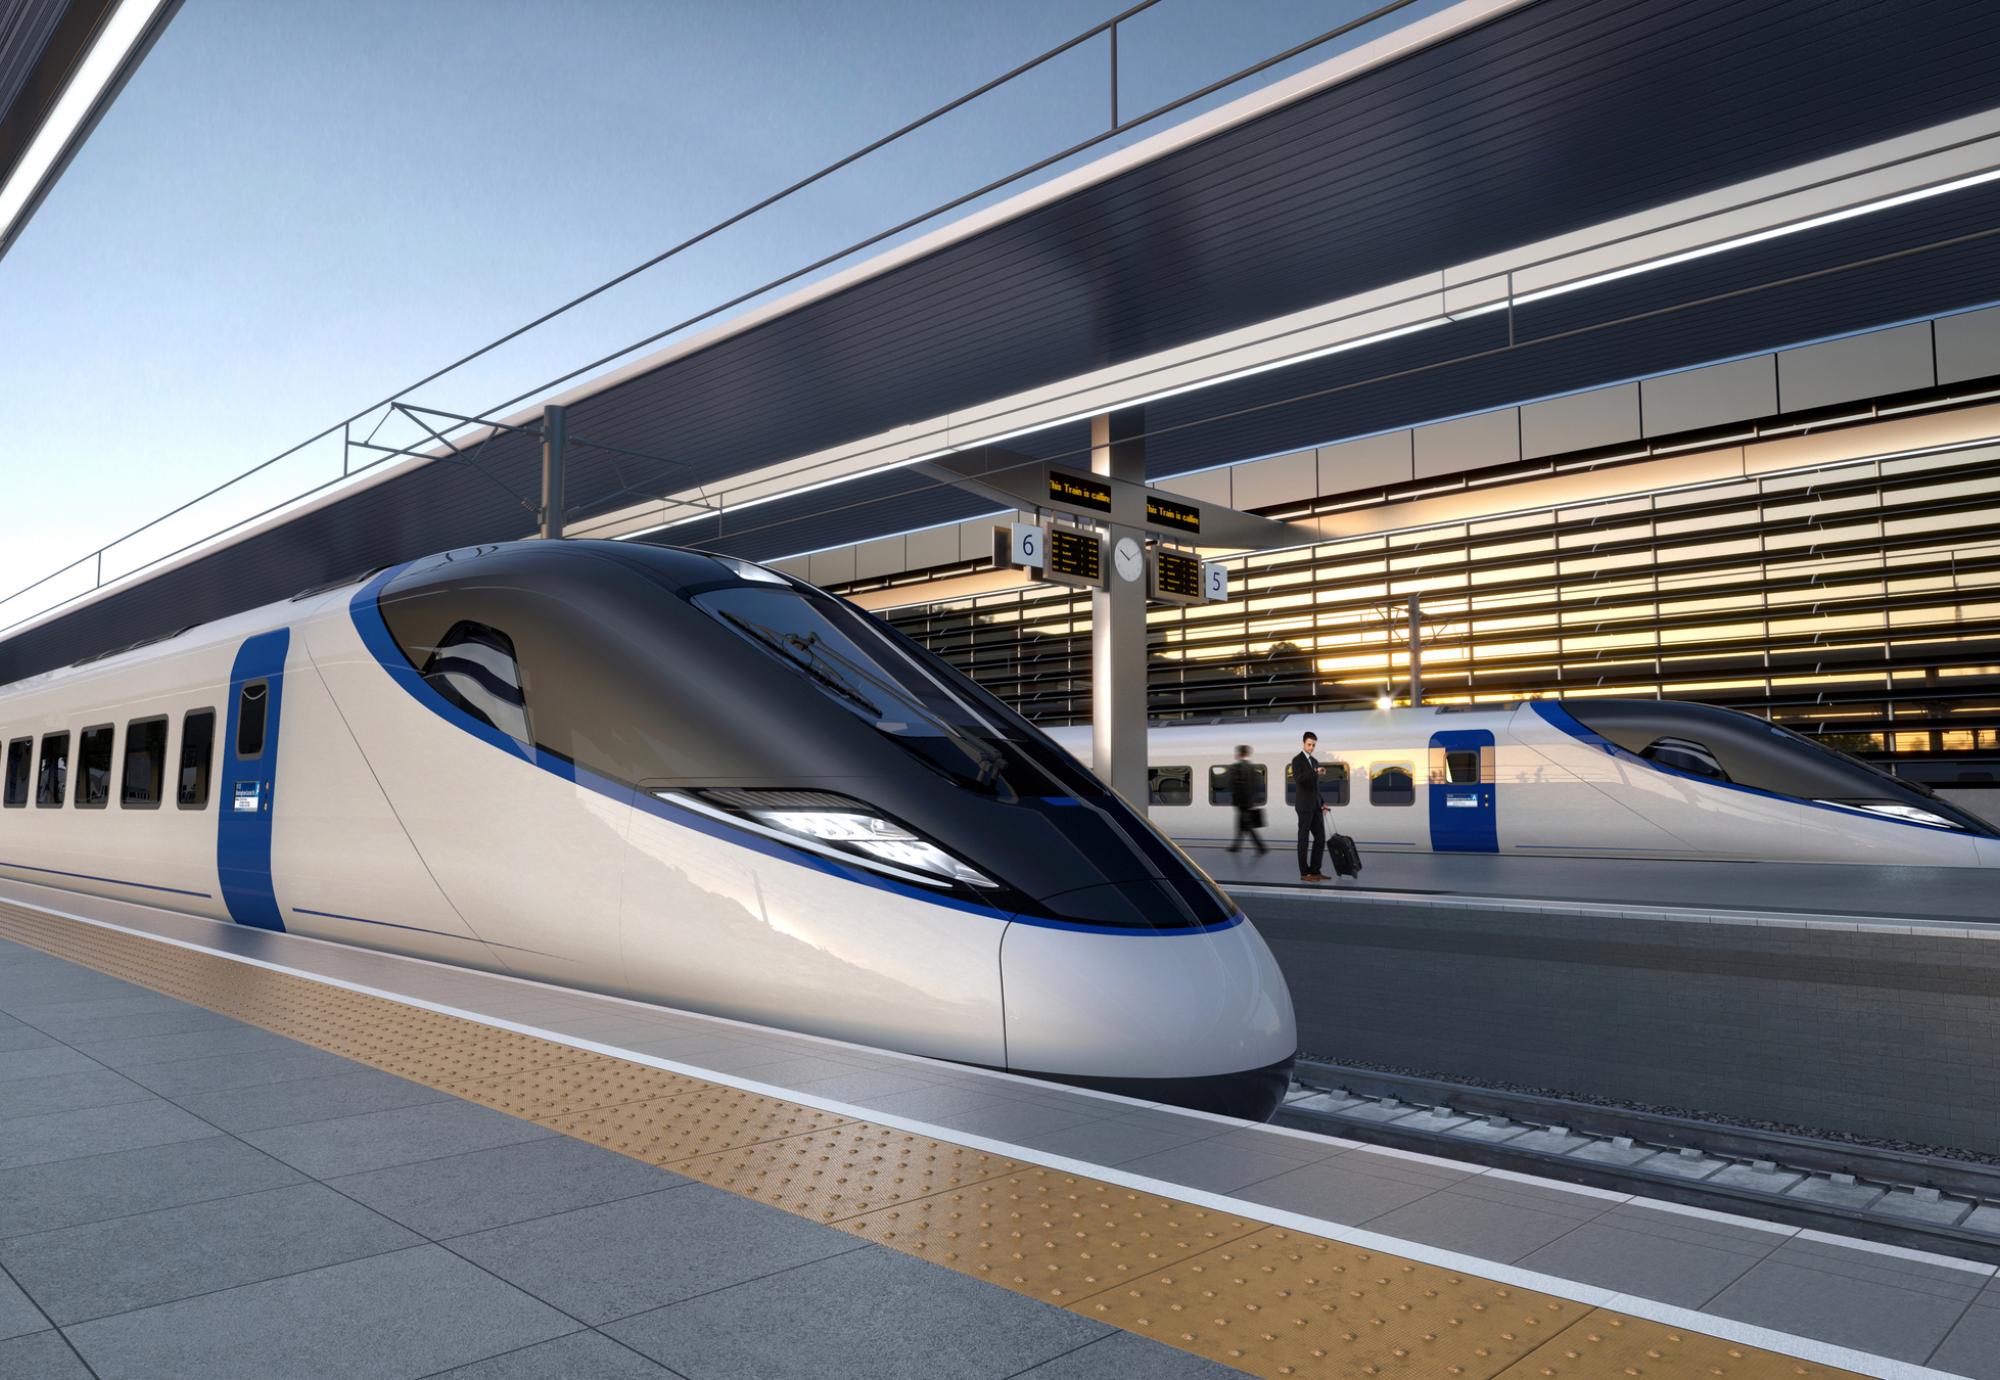 Design project of Alstom-Hitachi high-speed train for HS2 line in the UK